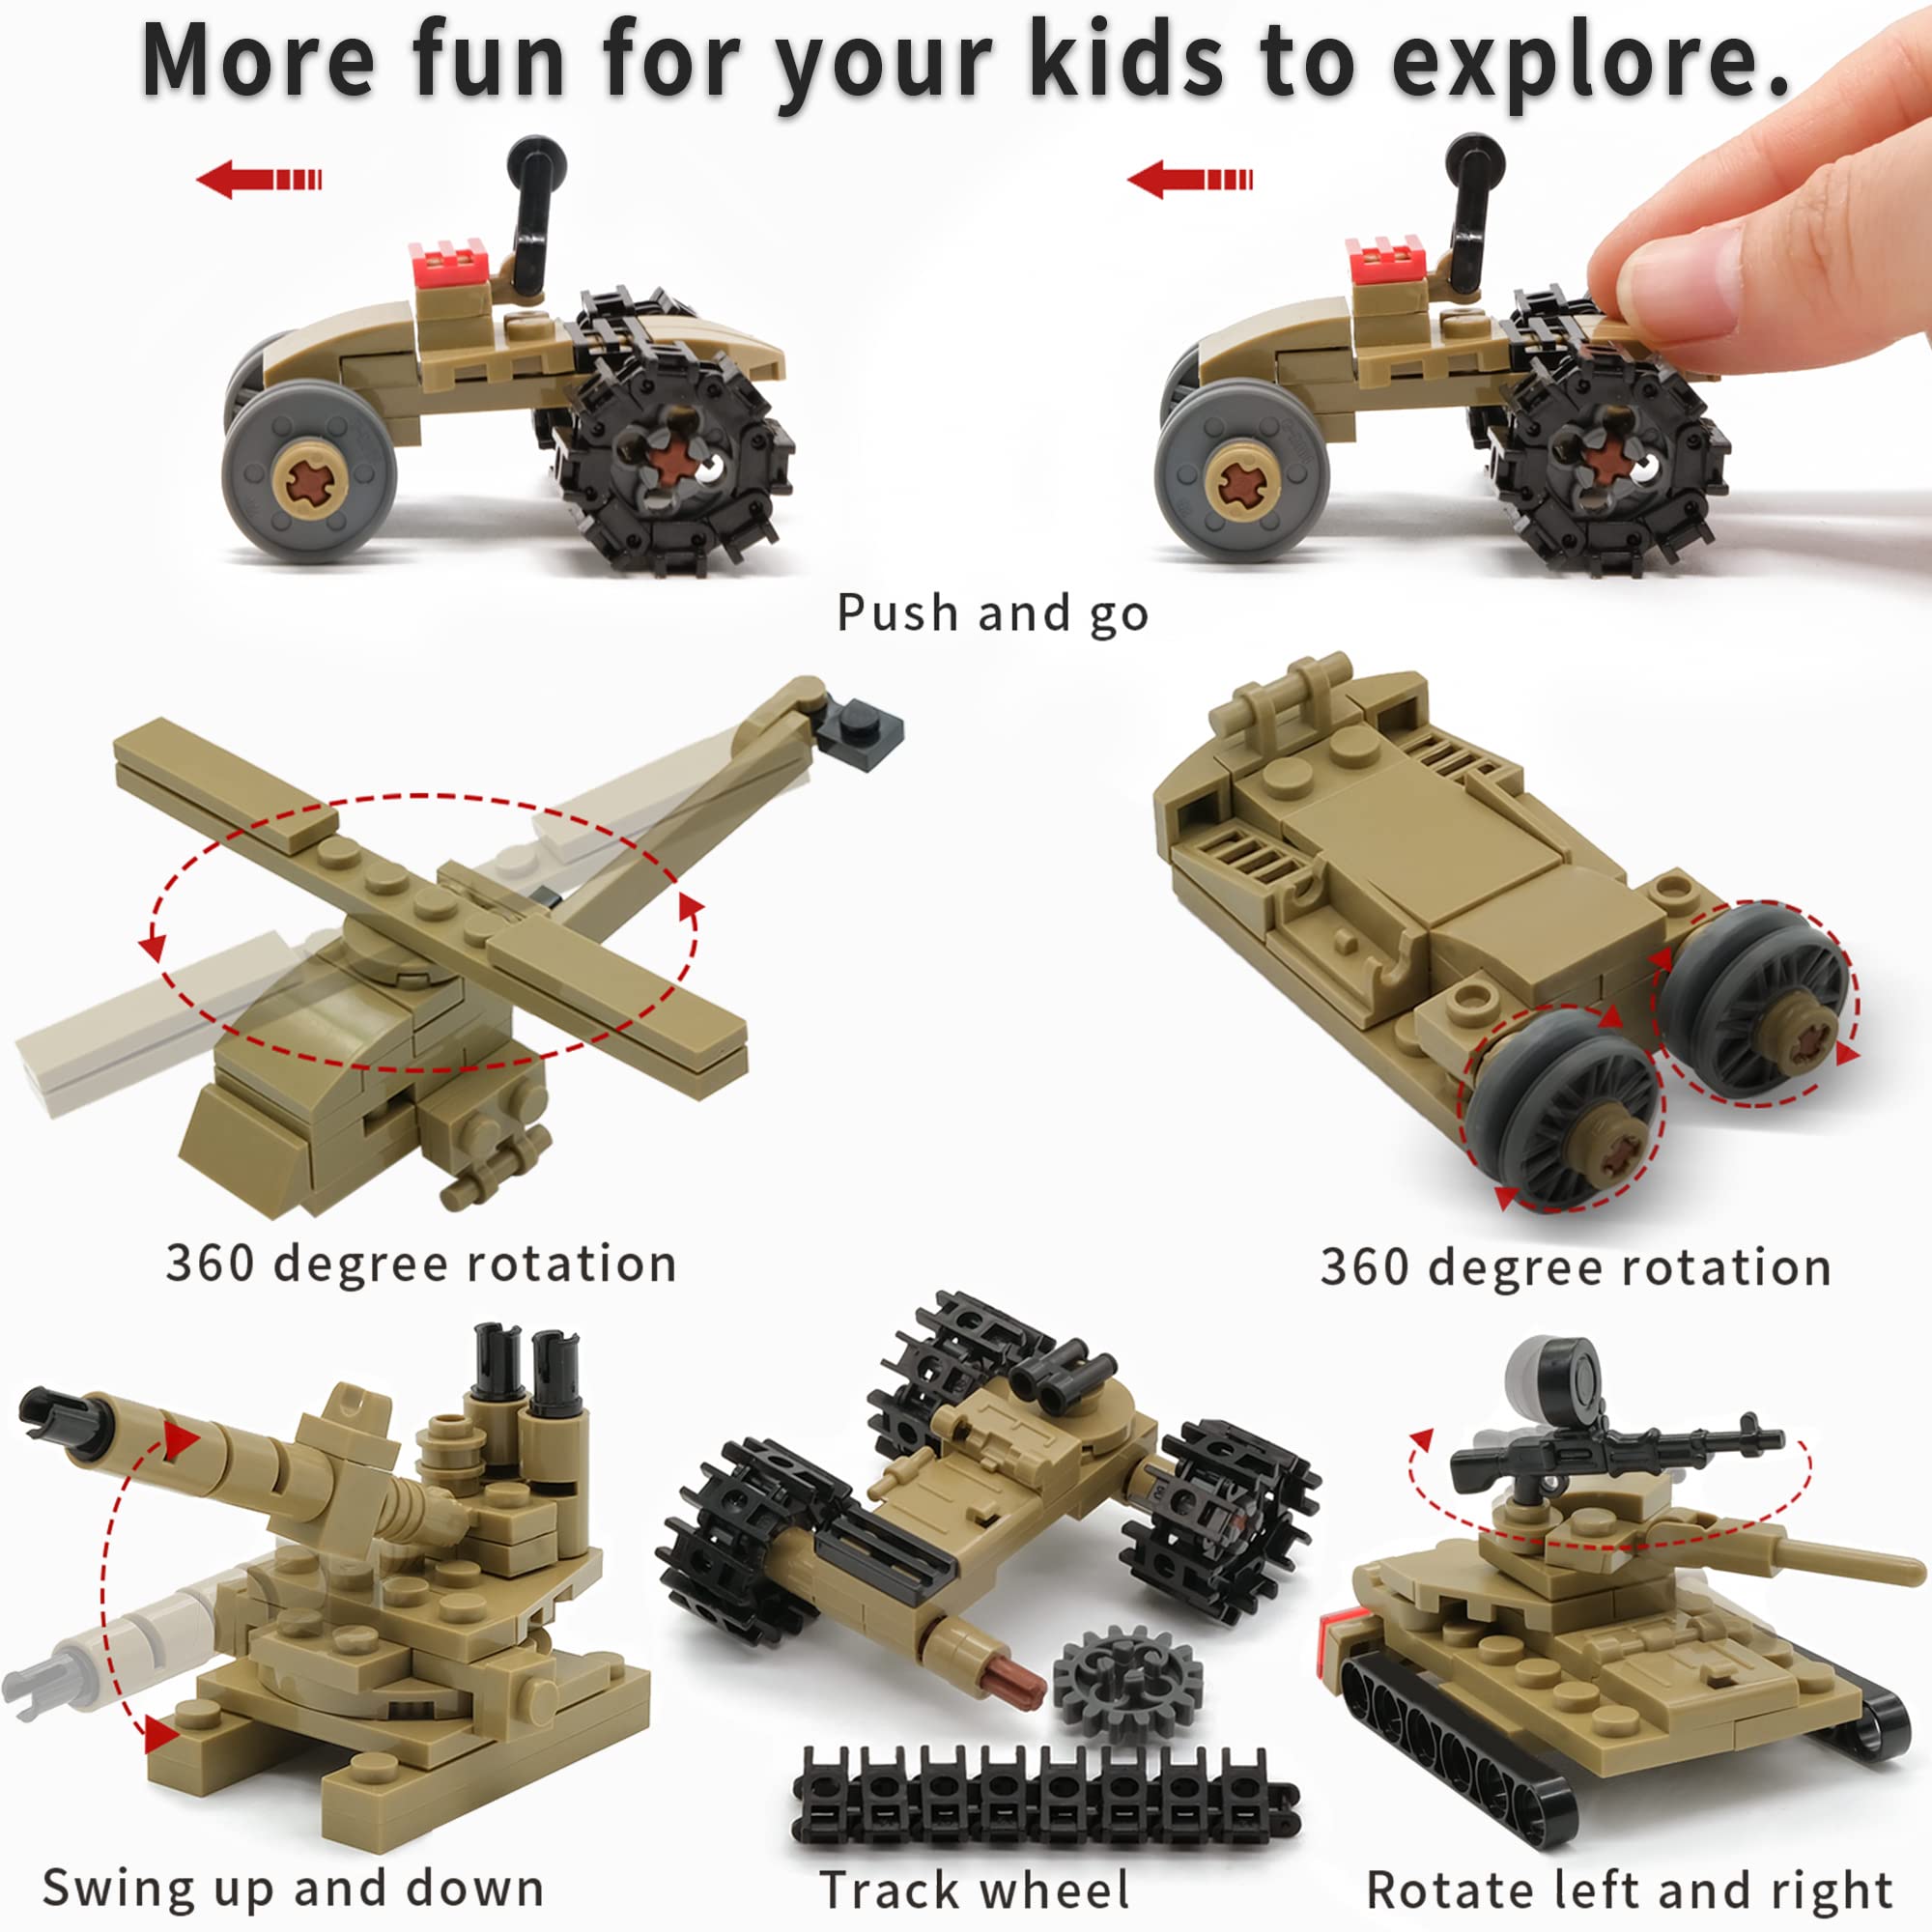 Army Tank Building Blocks Set with Toy Soldiers, Create a Armored Tank or 16 Small Military Models, Creative Army Men Toys Gifts for Boys Kids Age 6 7 8 9 Year Old (517Pcs)